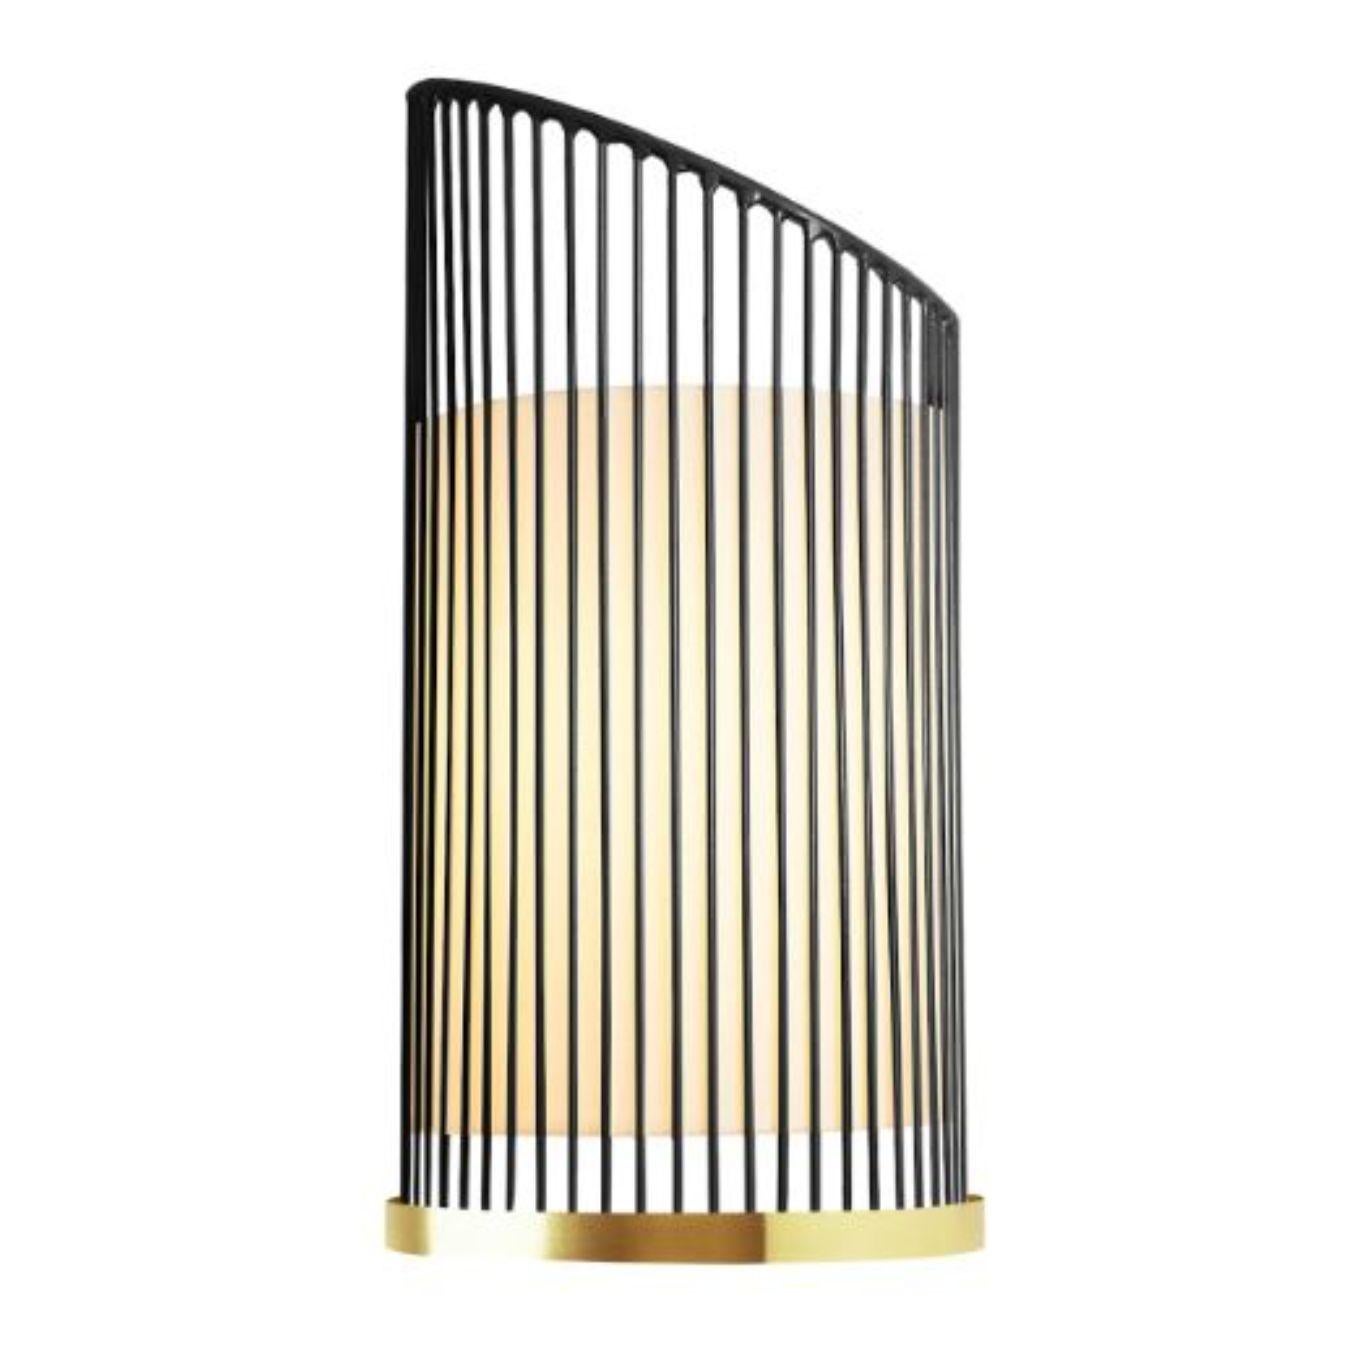 Black new spider wall lamp with brass ring by Dooq.
Dimensions: W 25x D 15x H 50cm.
Materials: lacquered metal, polished or brushed metal, brass.
abat-jour: cotton
Also available in different colors and materials. 

Information:
230V/50Hz
E14/1x15W